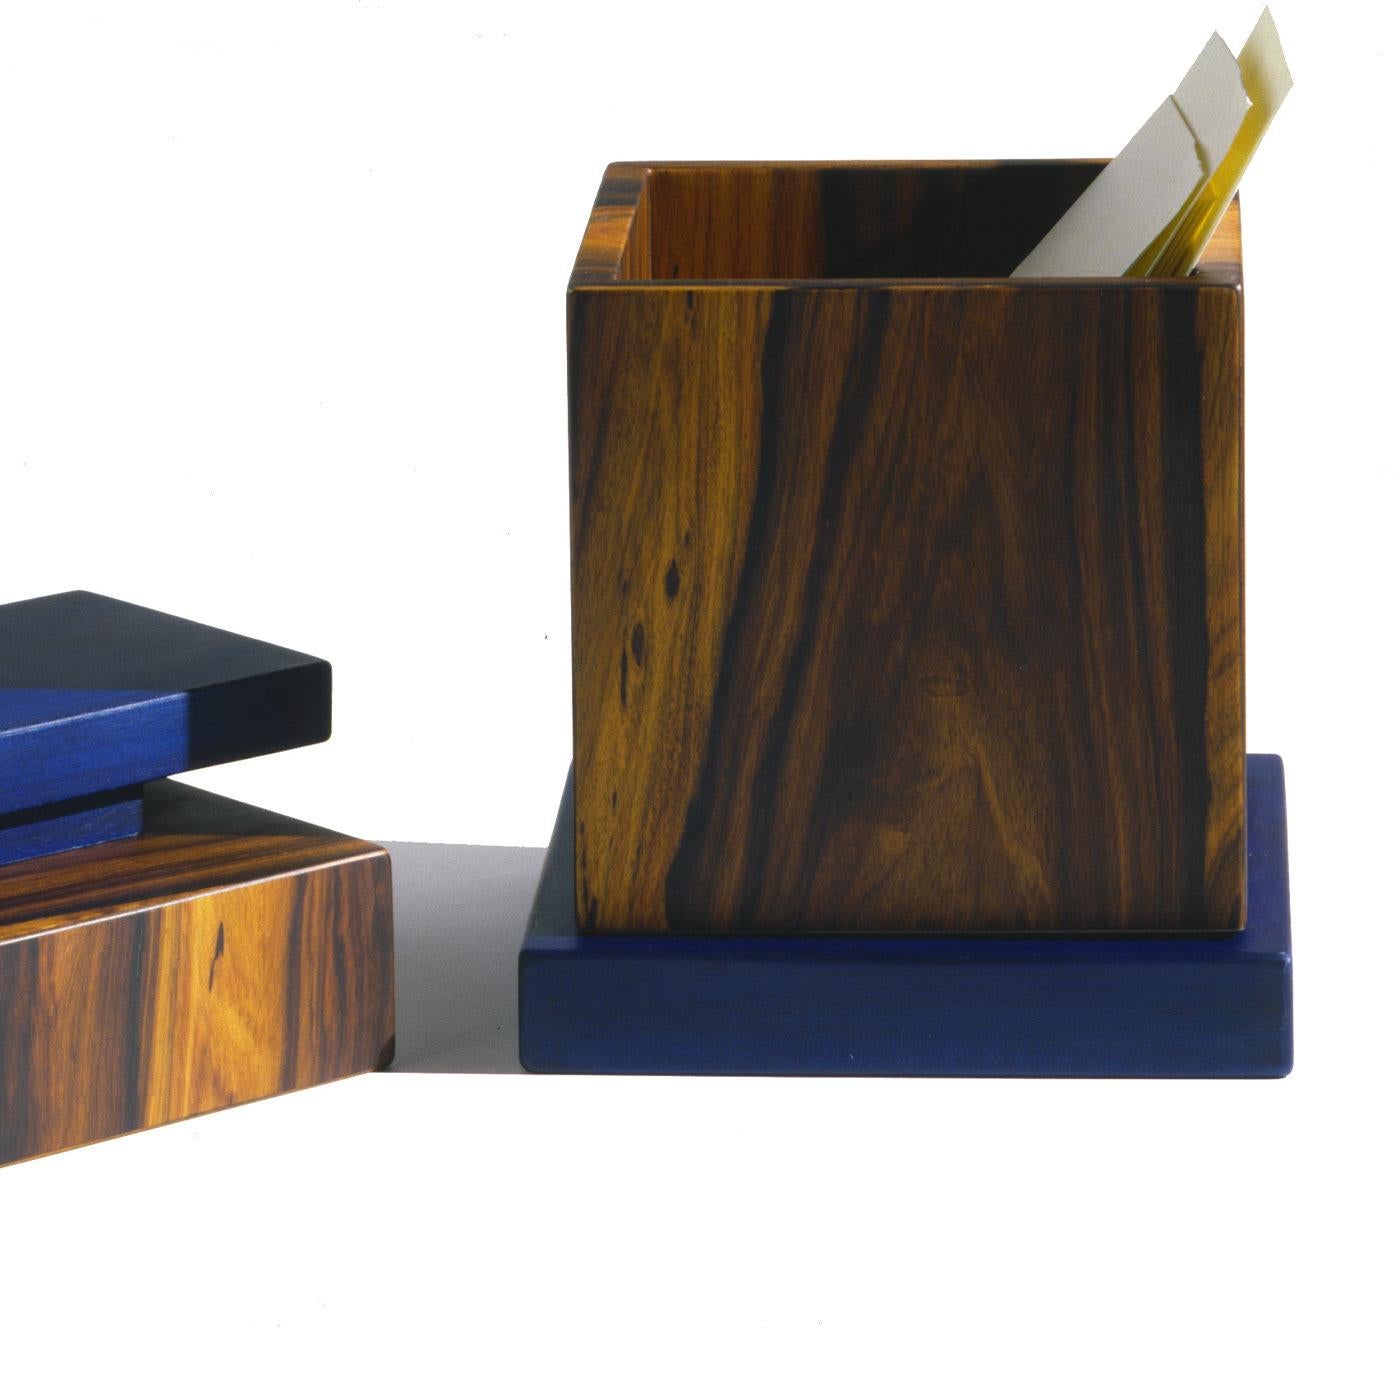 Distinguished for an extraordinary combination of three different types of wood, this stunning box designed by Ettore Sottsass is part of a limited edition of 99 pieces. Showcasing captivating hues of exquisite elegant flair, the box is made of